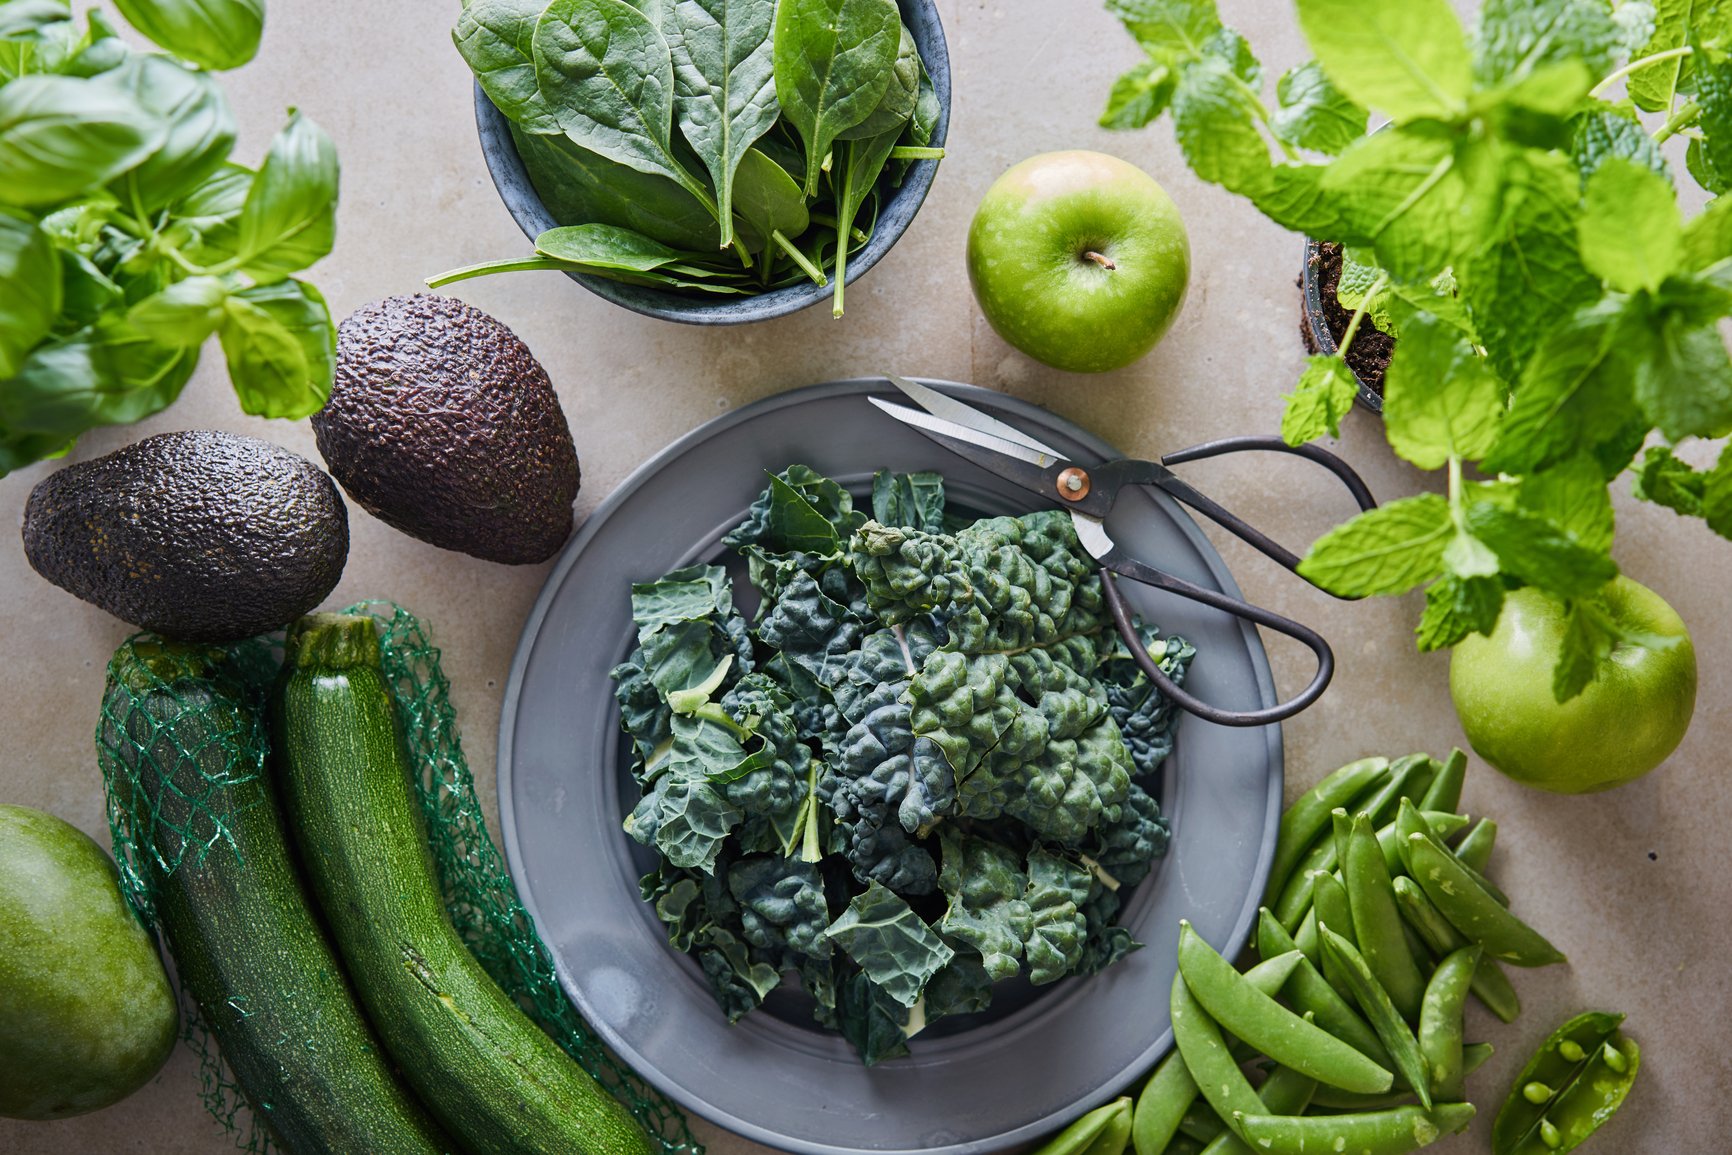 Flat lay of fresh green fruits, vegetables, and herbs that decrease inflammation and help reproductive health.